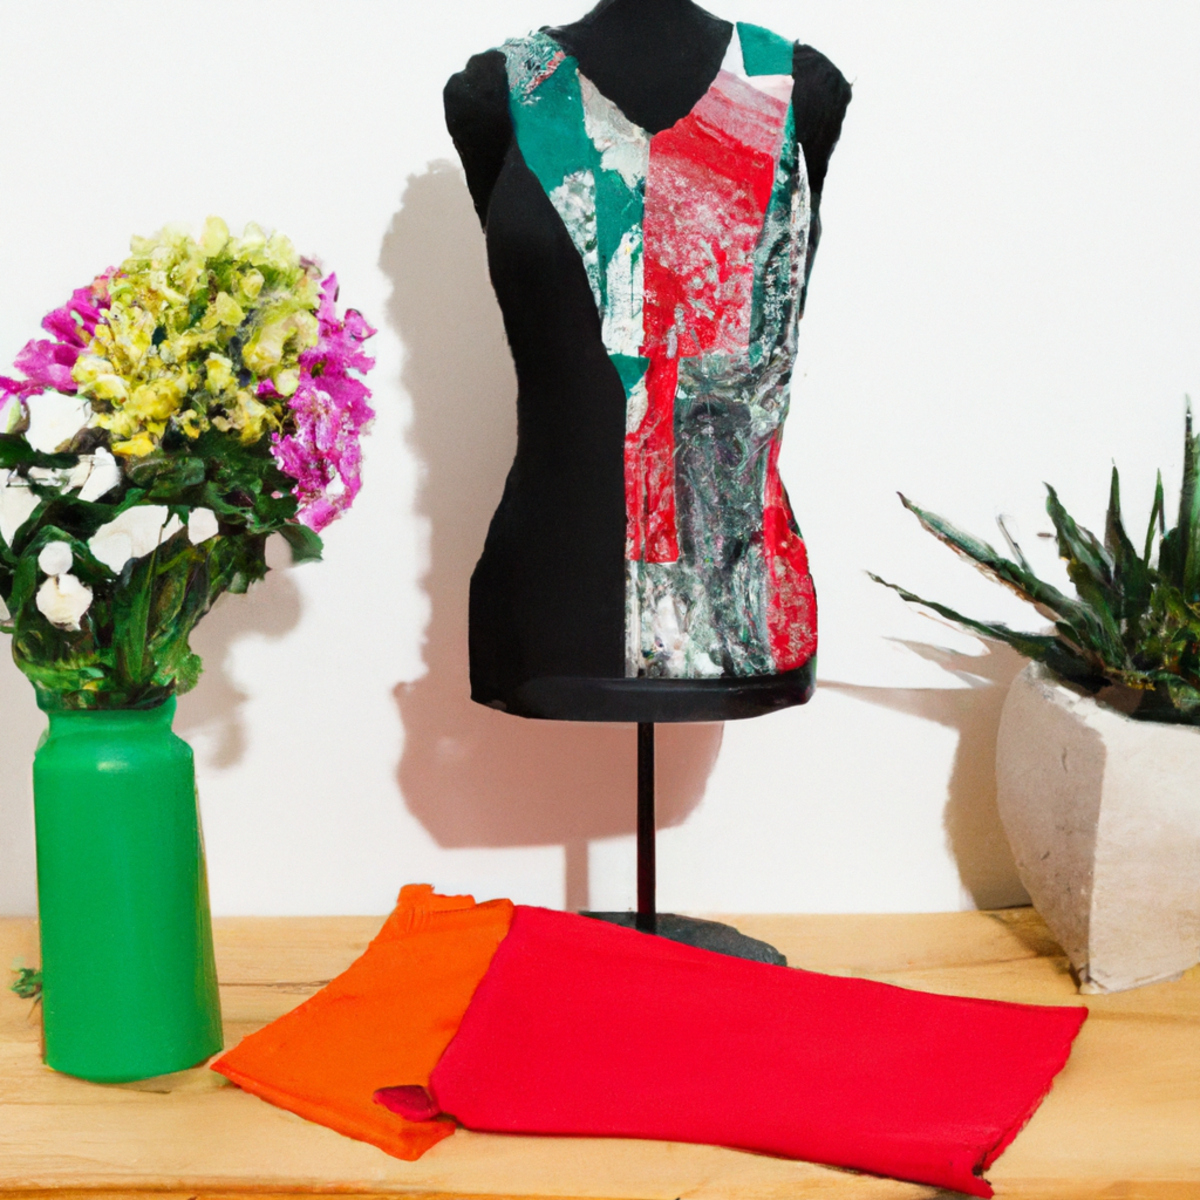 Eco-friendly display: flowers, cotton shirts, recycled accessories, timeless garments. Explore sustainable beauty and fashion.